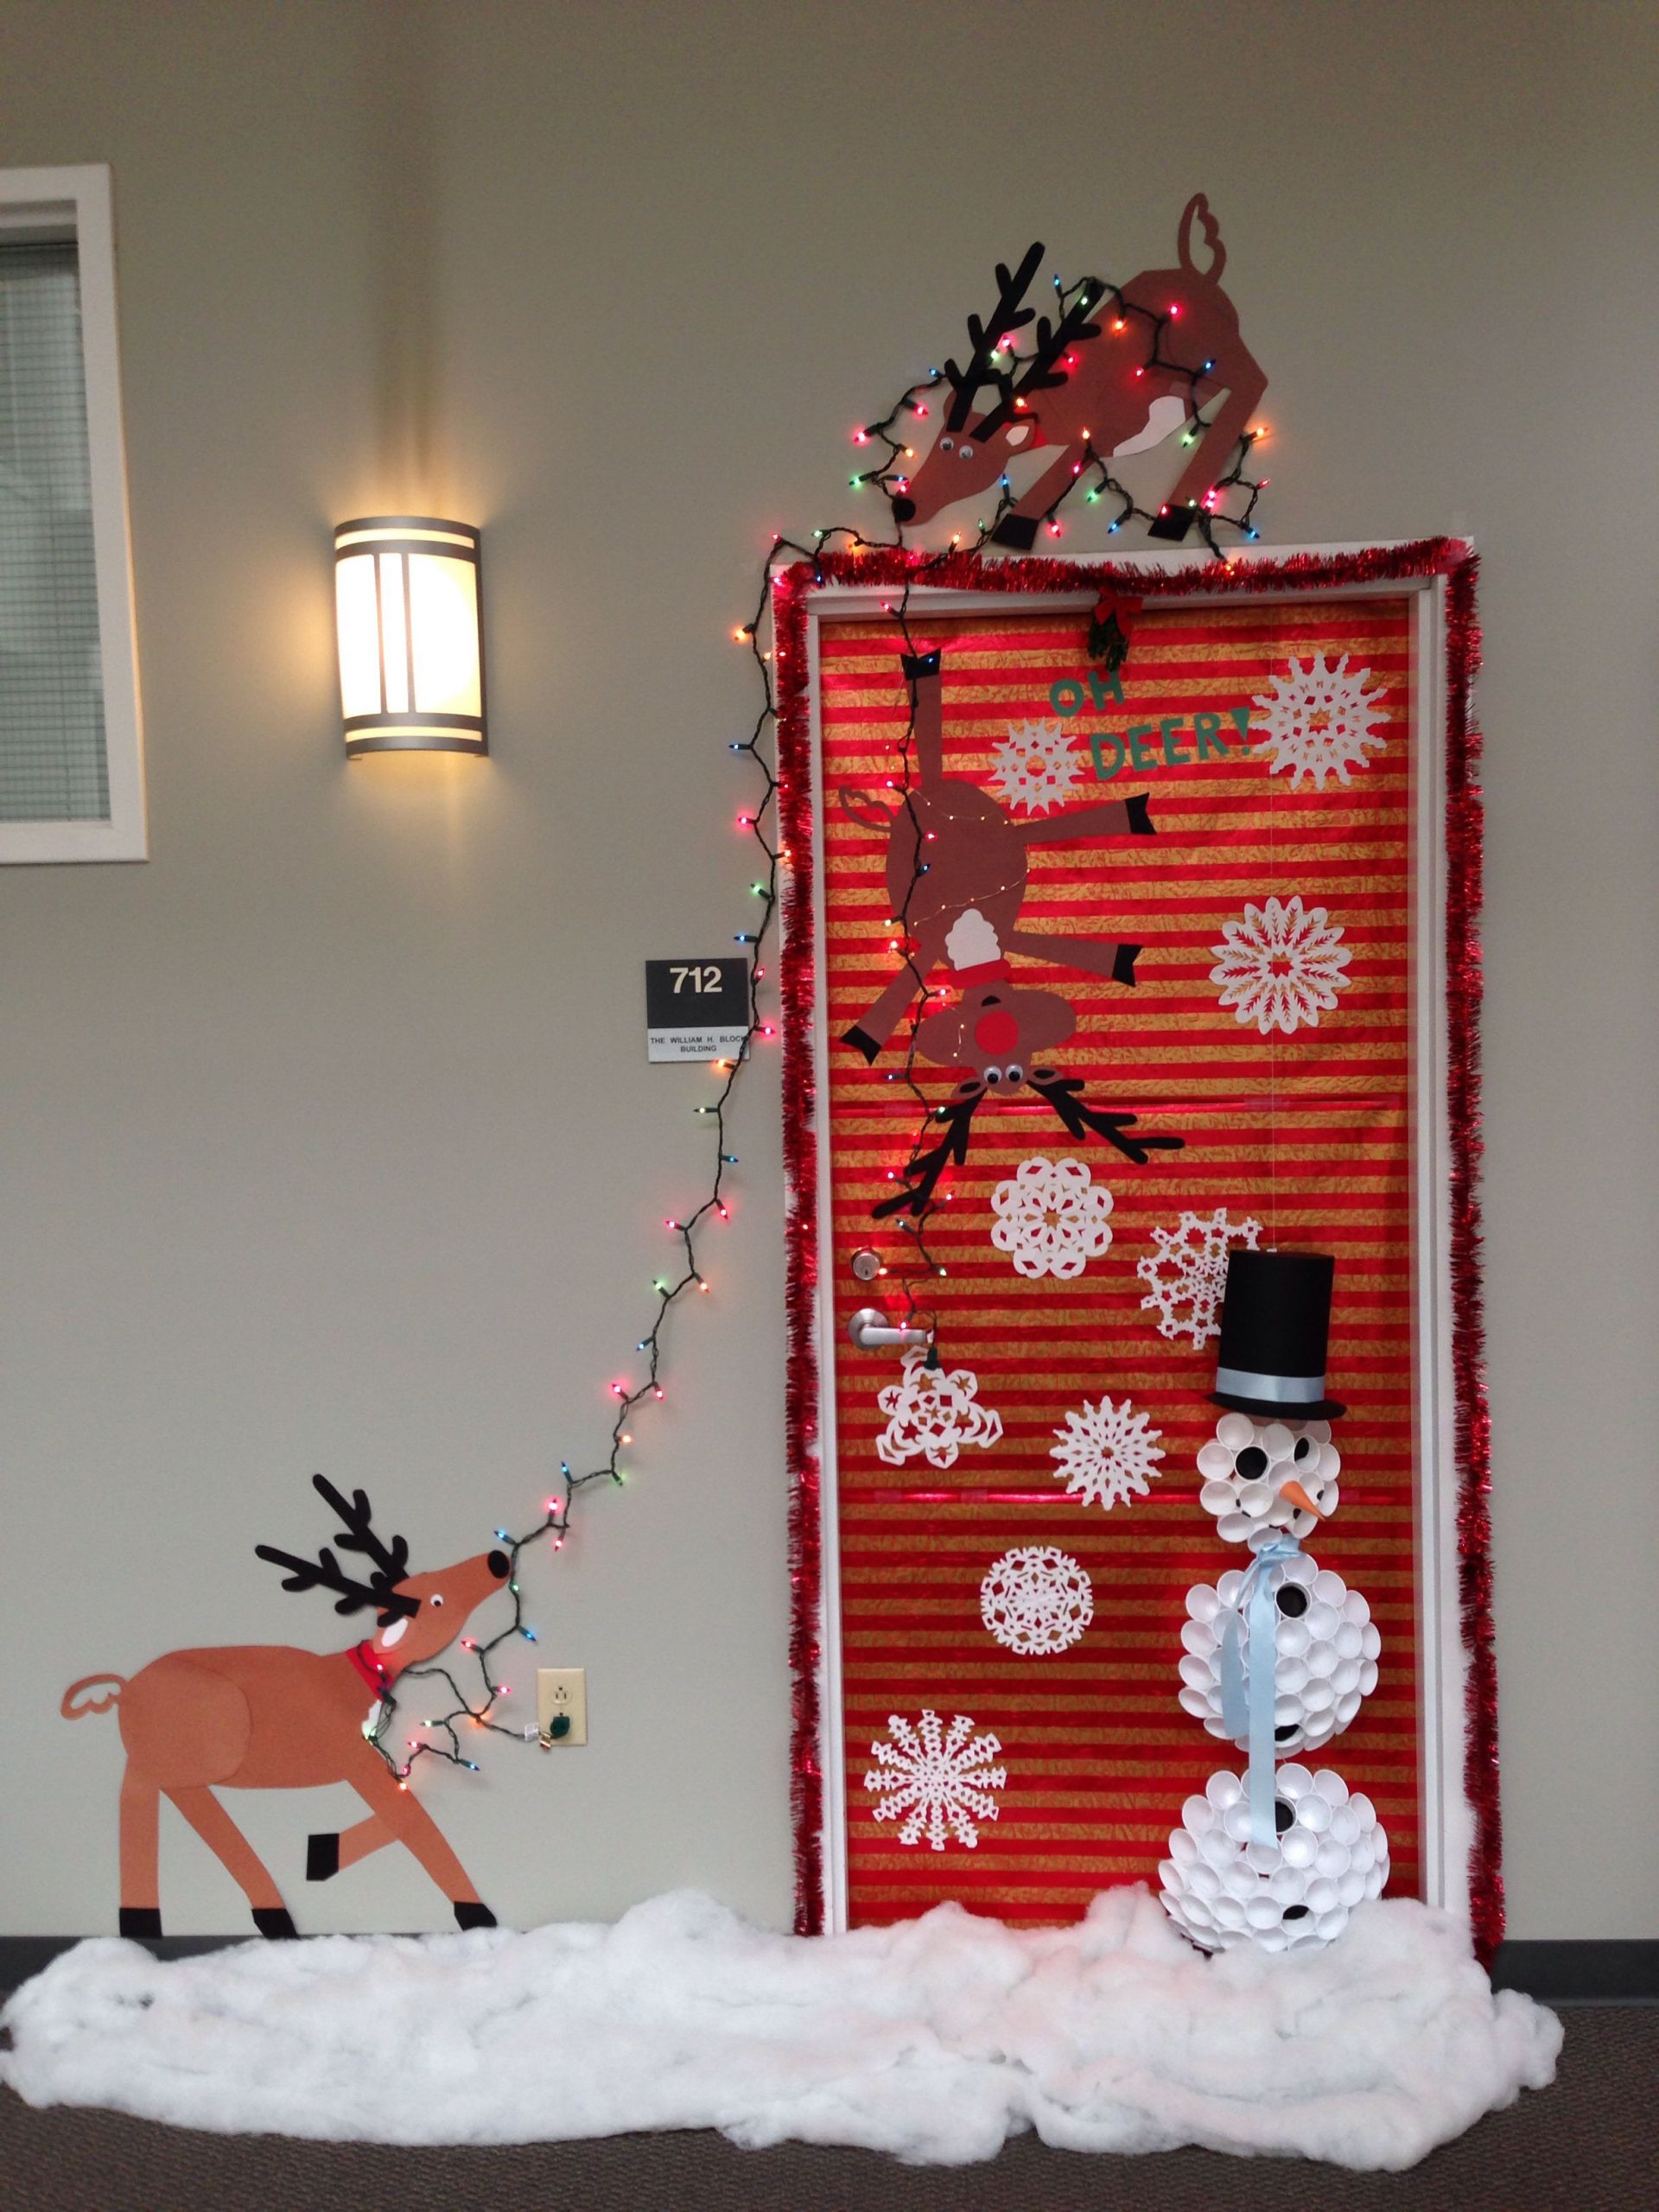 Christmas Door Decoration Ideas
 Our Christmas door decoration FIRST PLACE Made